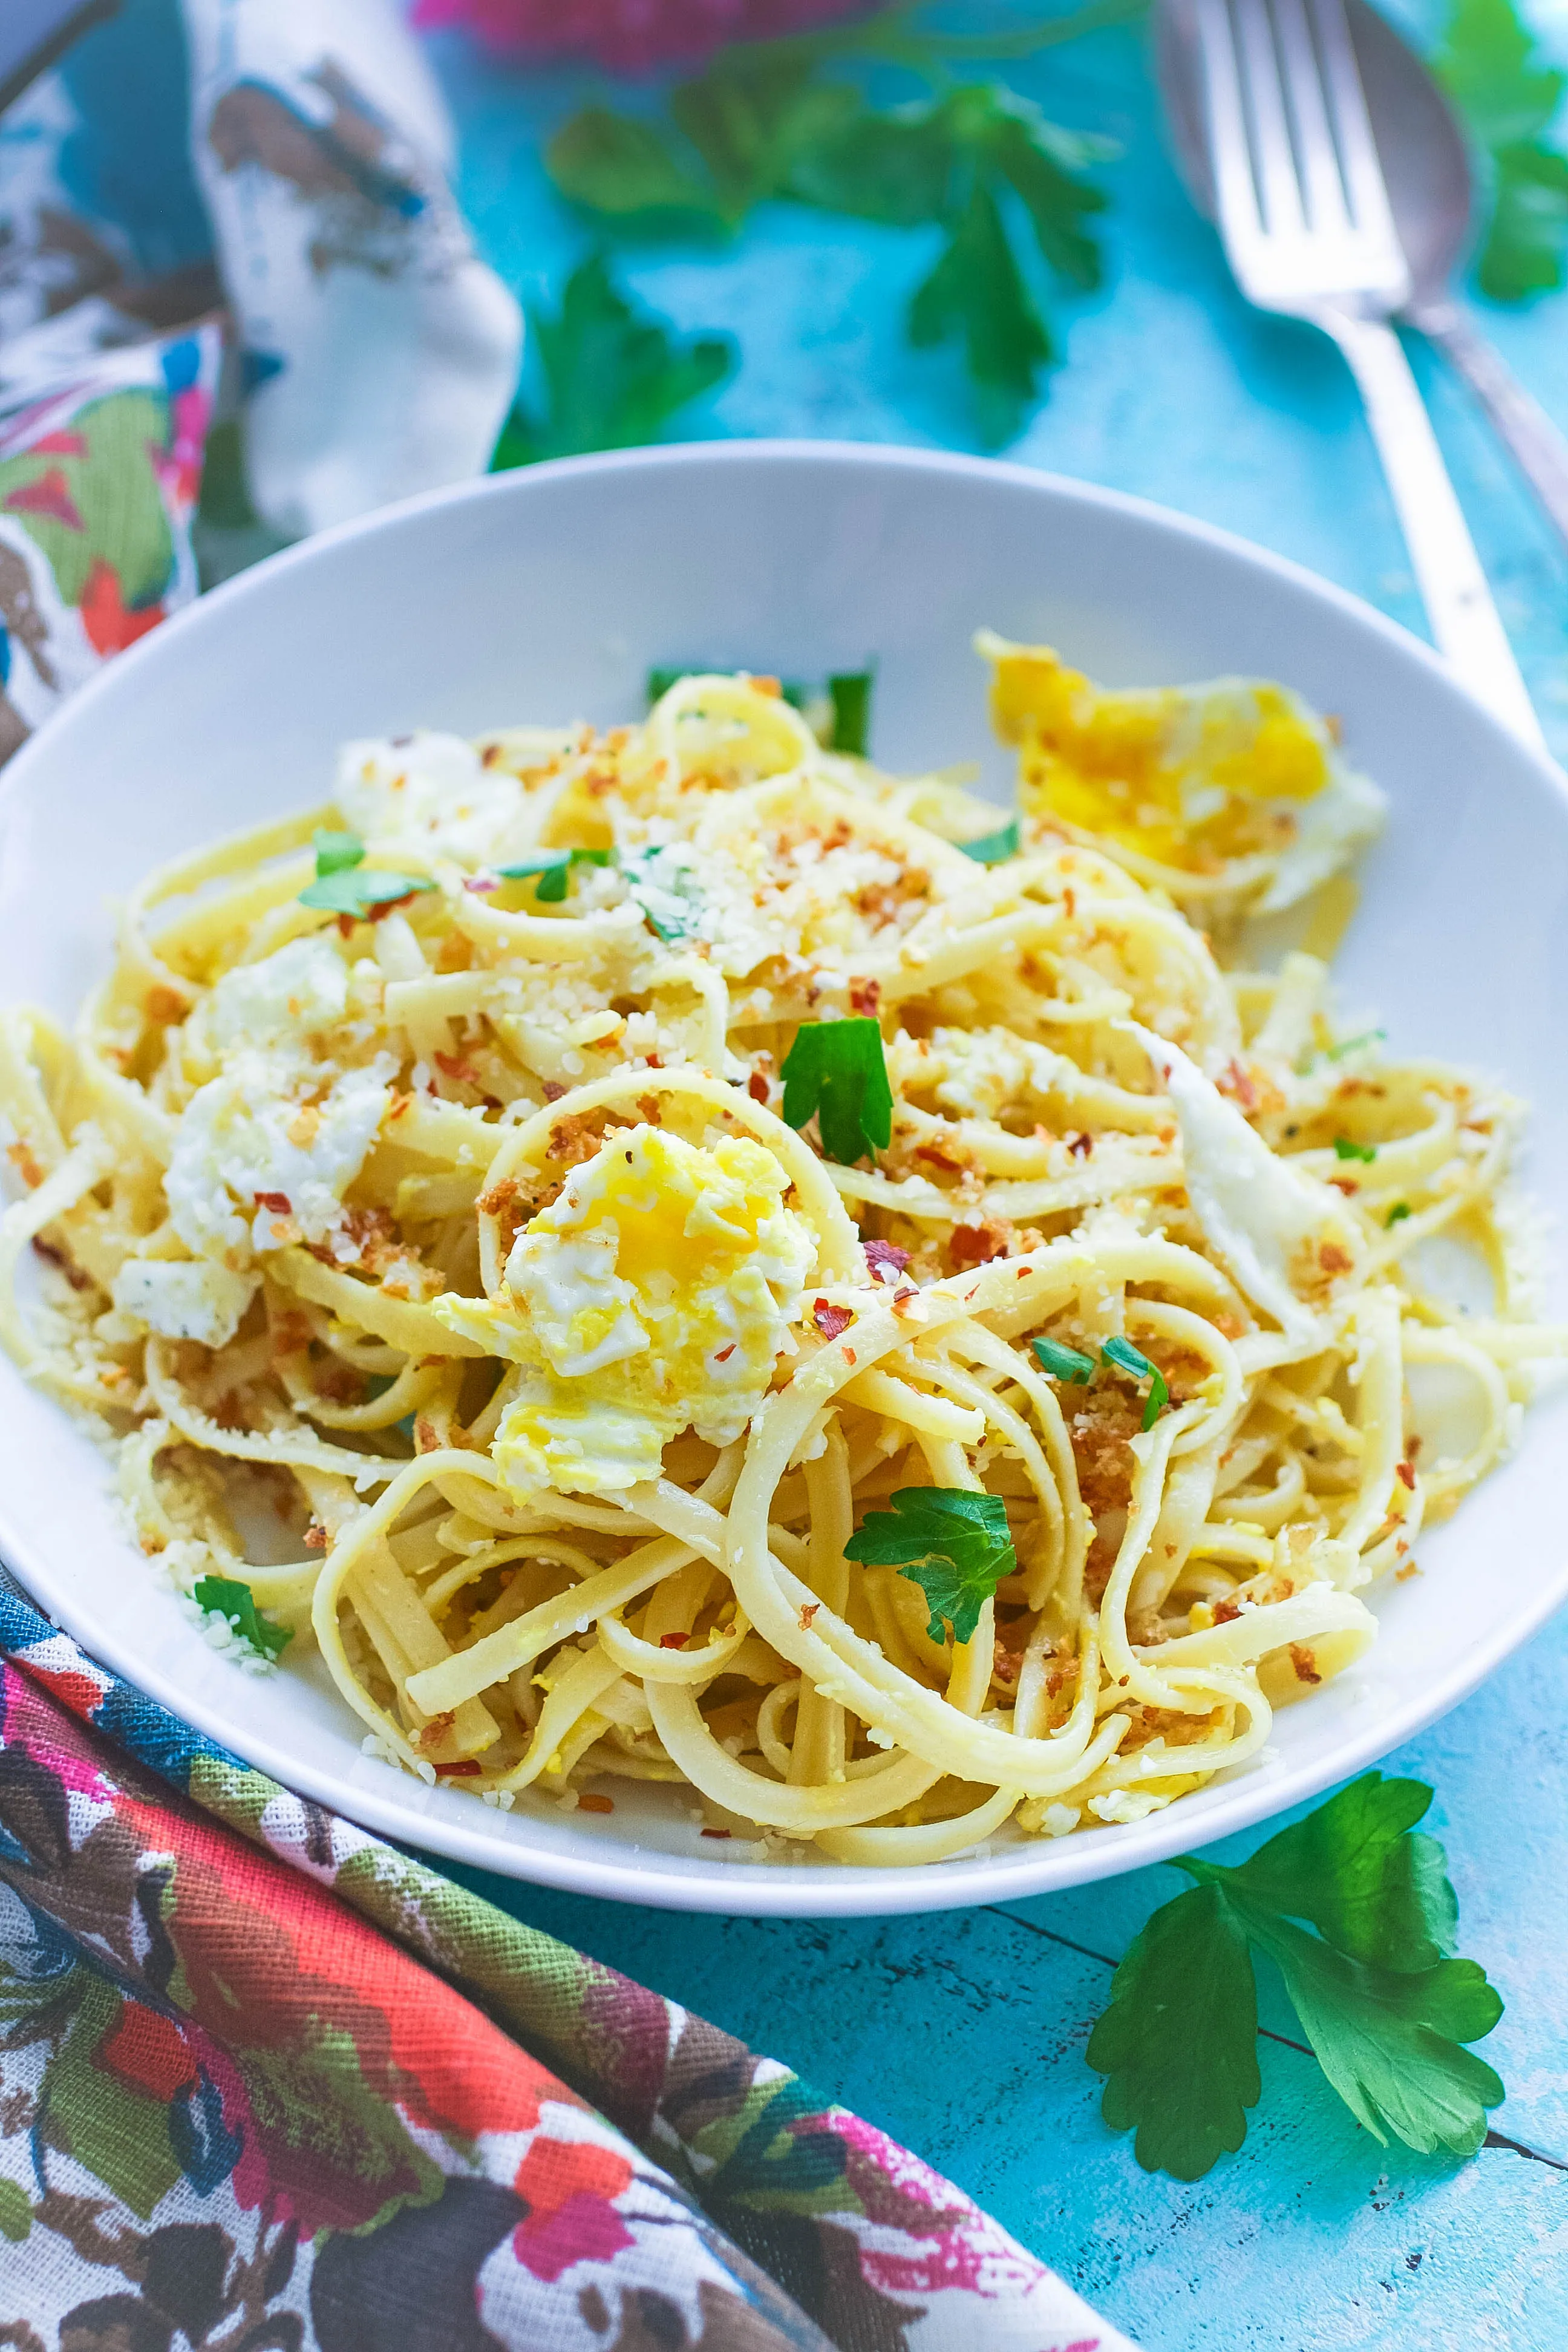 Spaghetti with Fried Eggs and Crunchy Breadcrumbs is an easy-to-make dish for any night. Spaghetti with Fried Eggs and Crunchy Breadcrumbs is also nice to have on hand when you're busy!